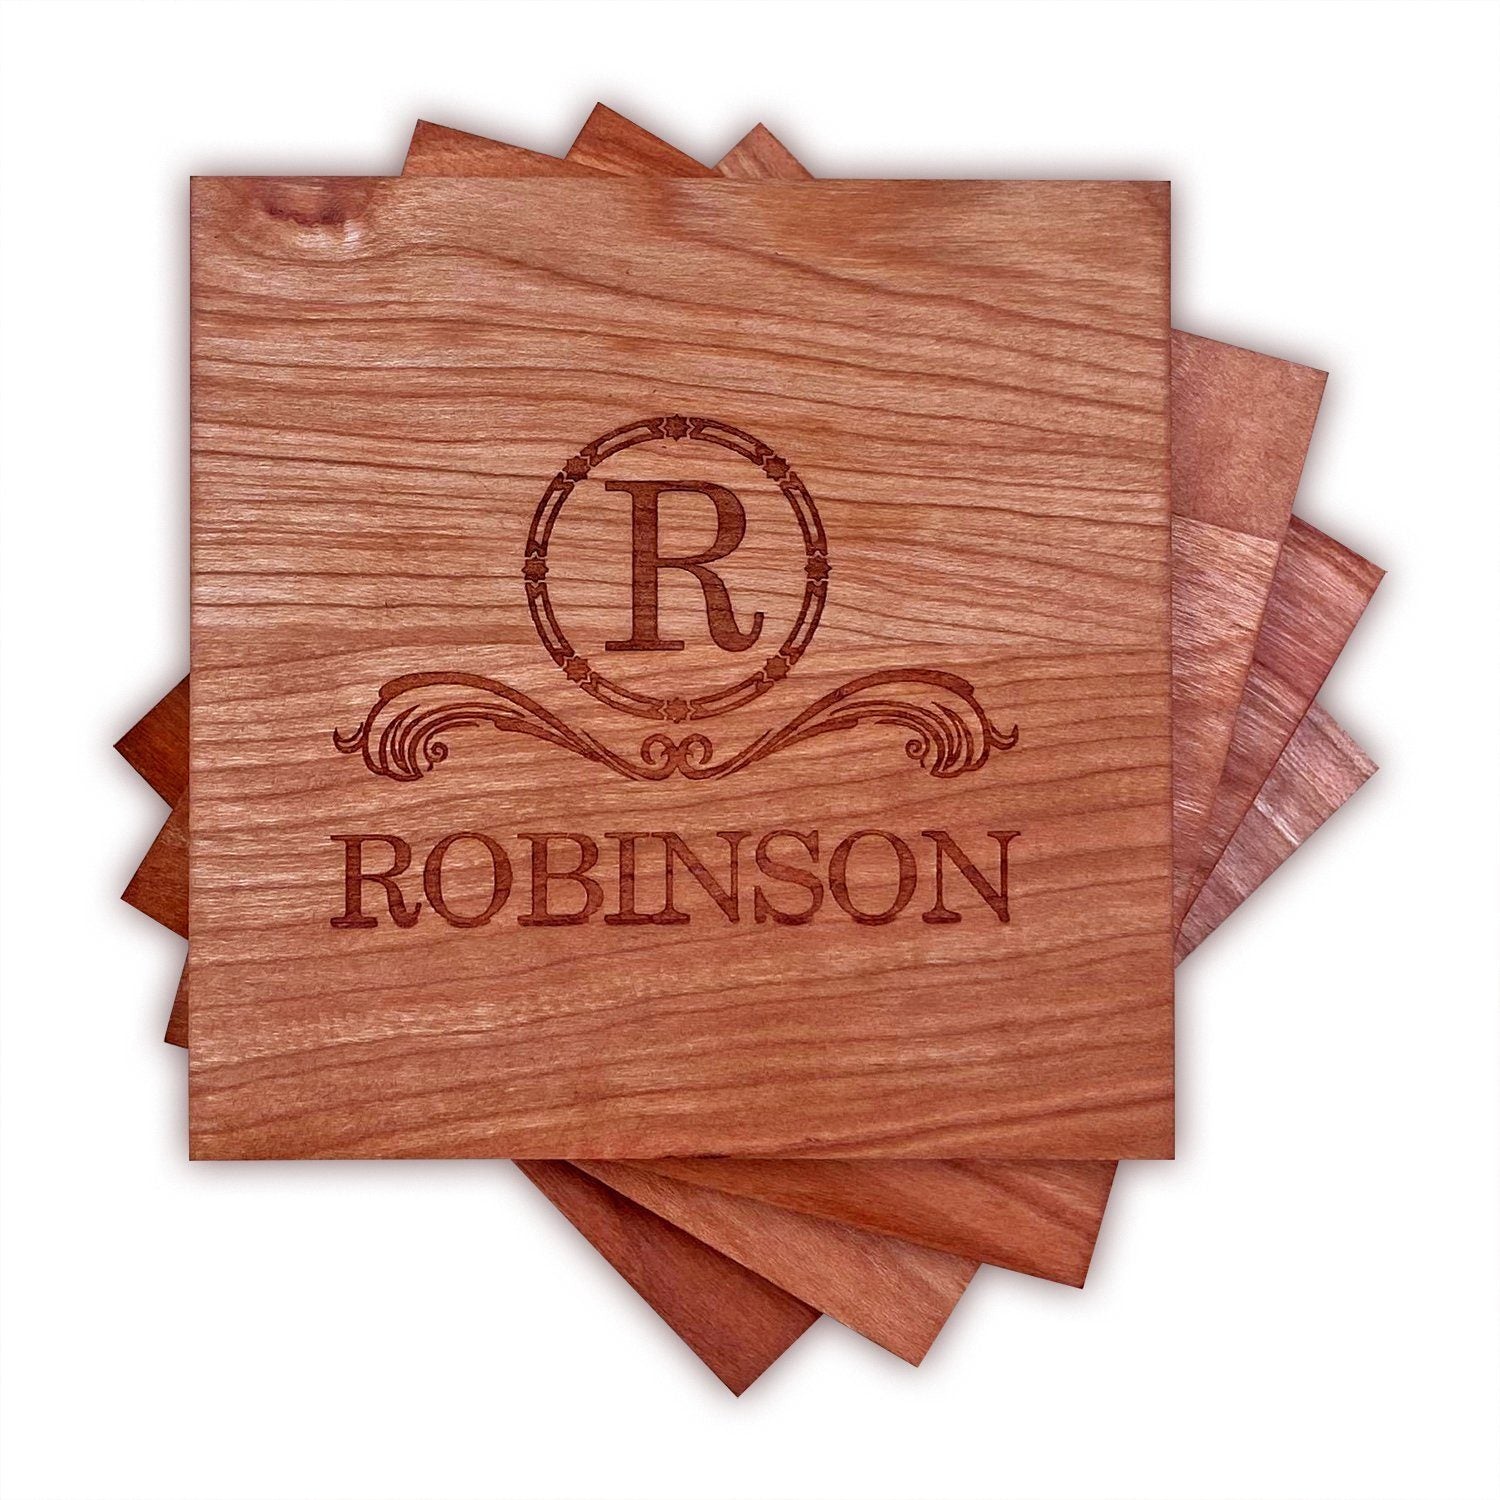 DESIGNER COASTER SET OF 6 BEAUTIFUL WOODEN COASTERS WITH PROPER COASTER  STAND 